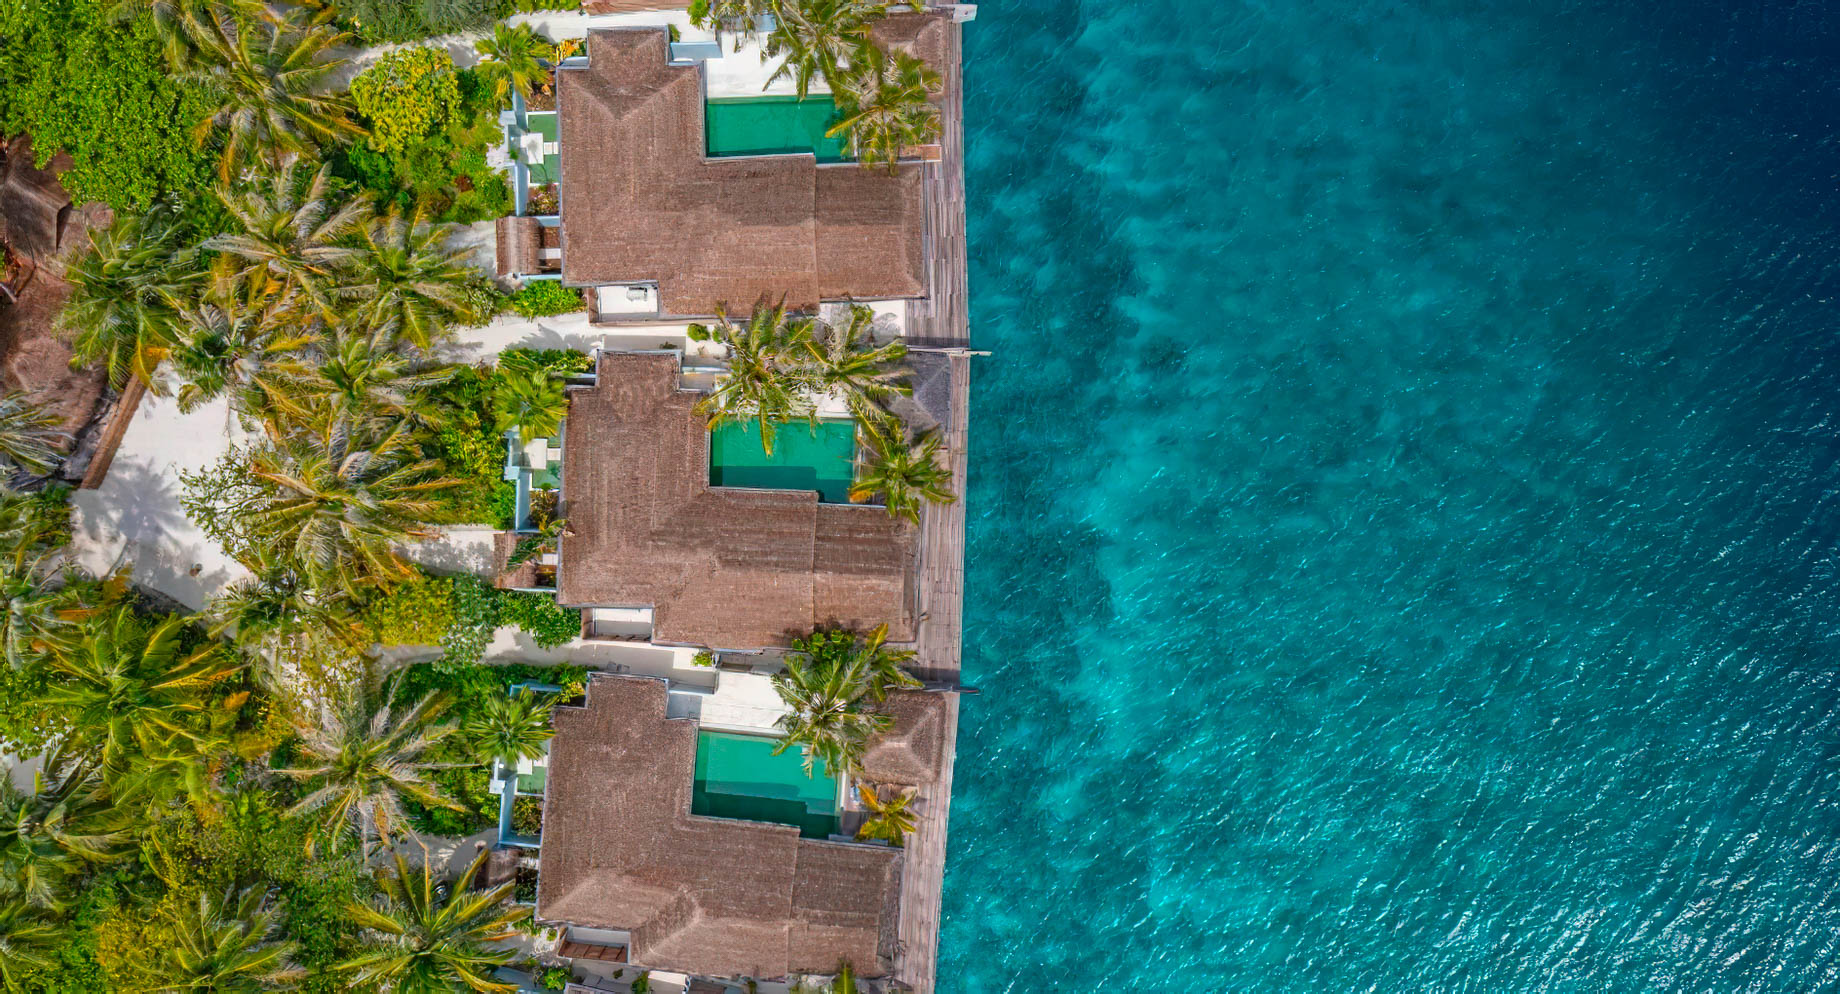 Naladhu Private Island Maldives Resort – South Male Atoll, Maldives – Ocean House with Pool and Private Beach Cabana Overhead Aerial View